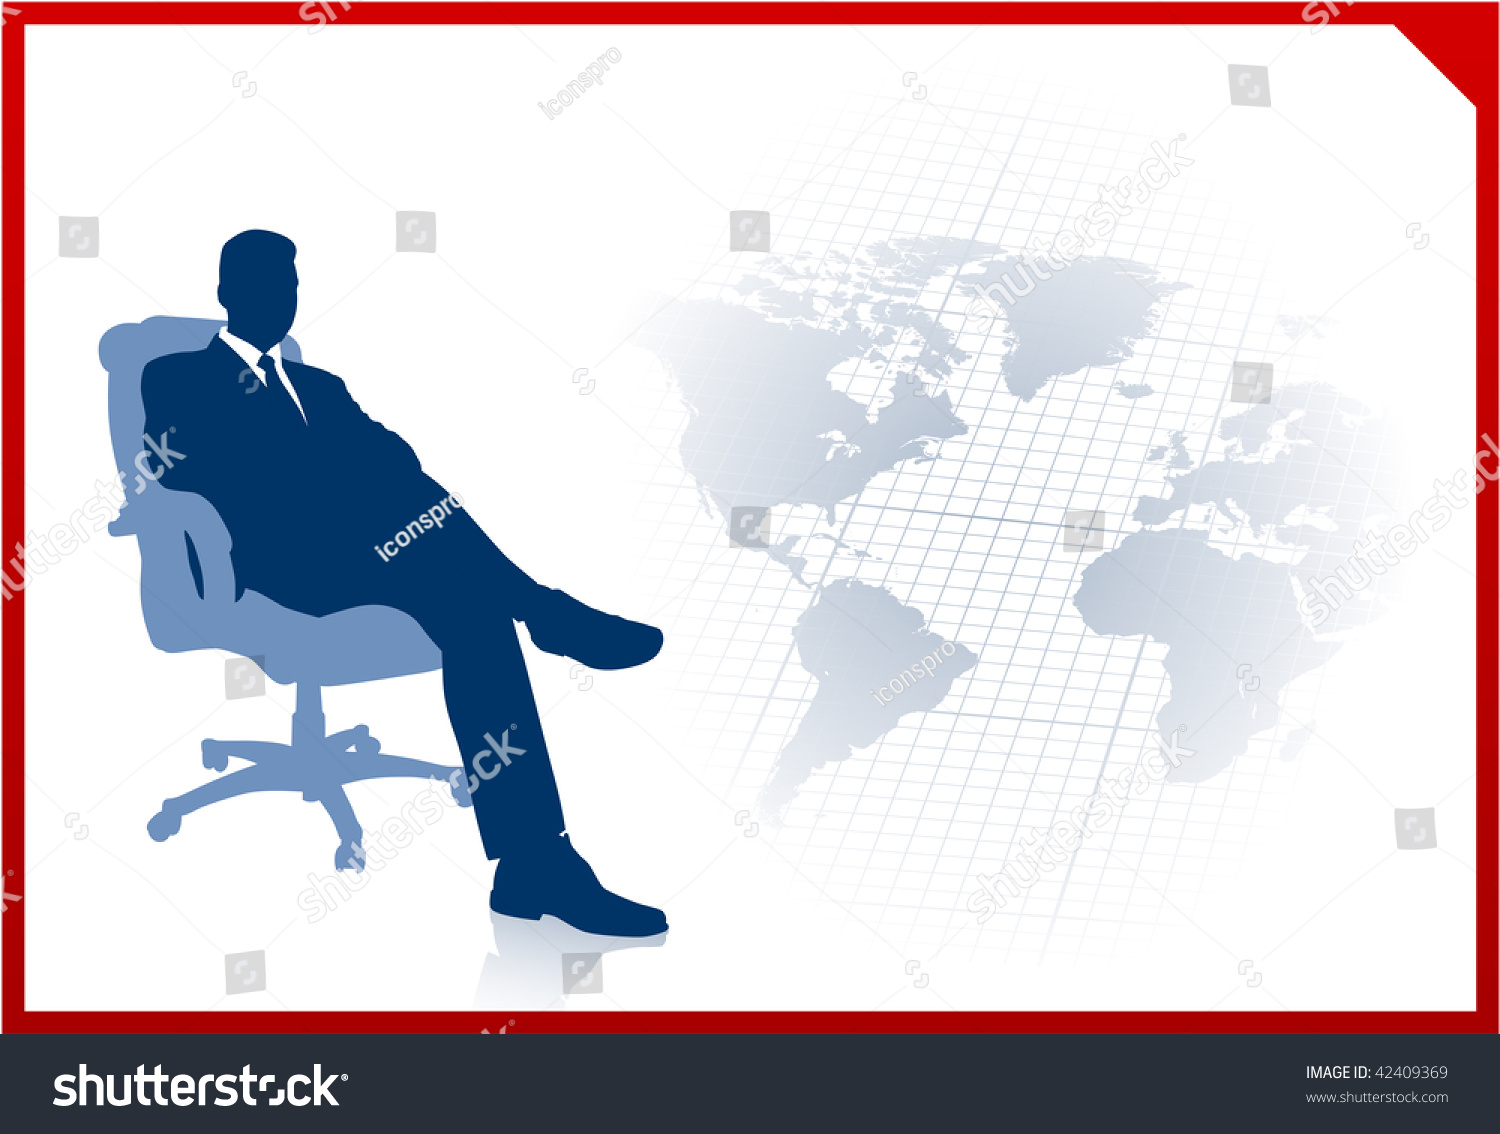 Ceo On World Map Background Stock Vector Royalty